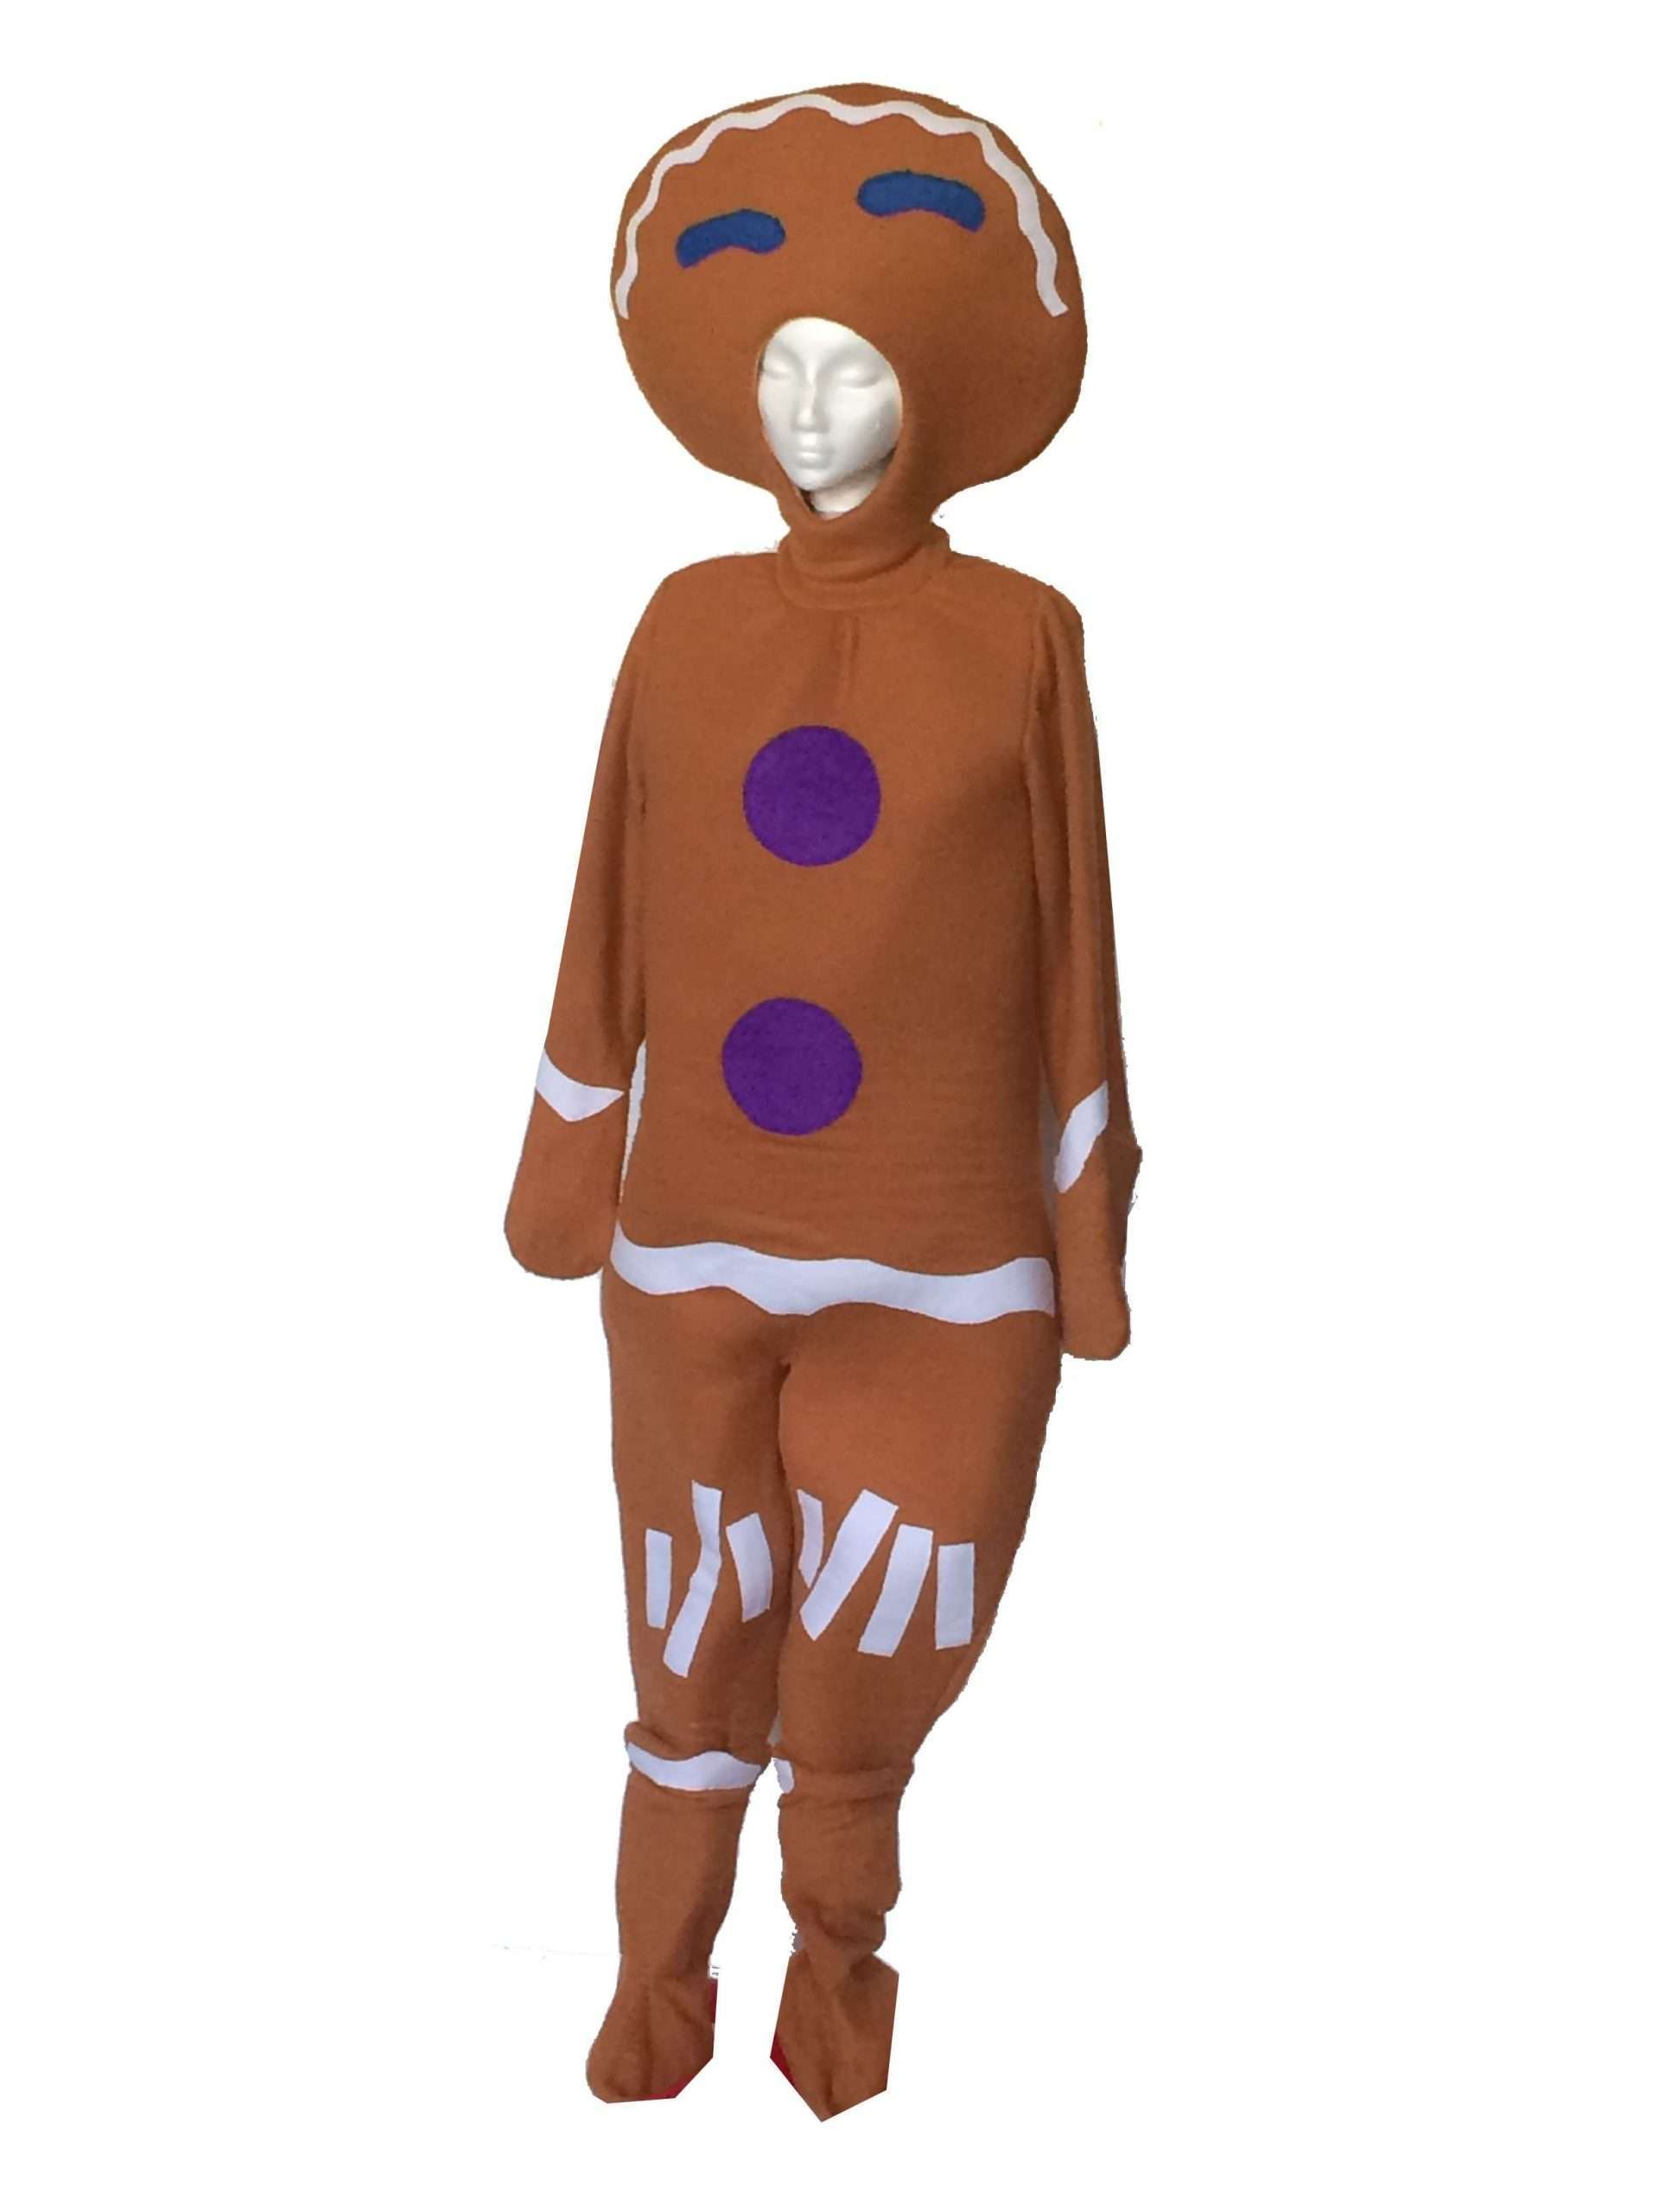 Gingy - Gingerbread Man - Costumes Without Drama